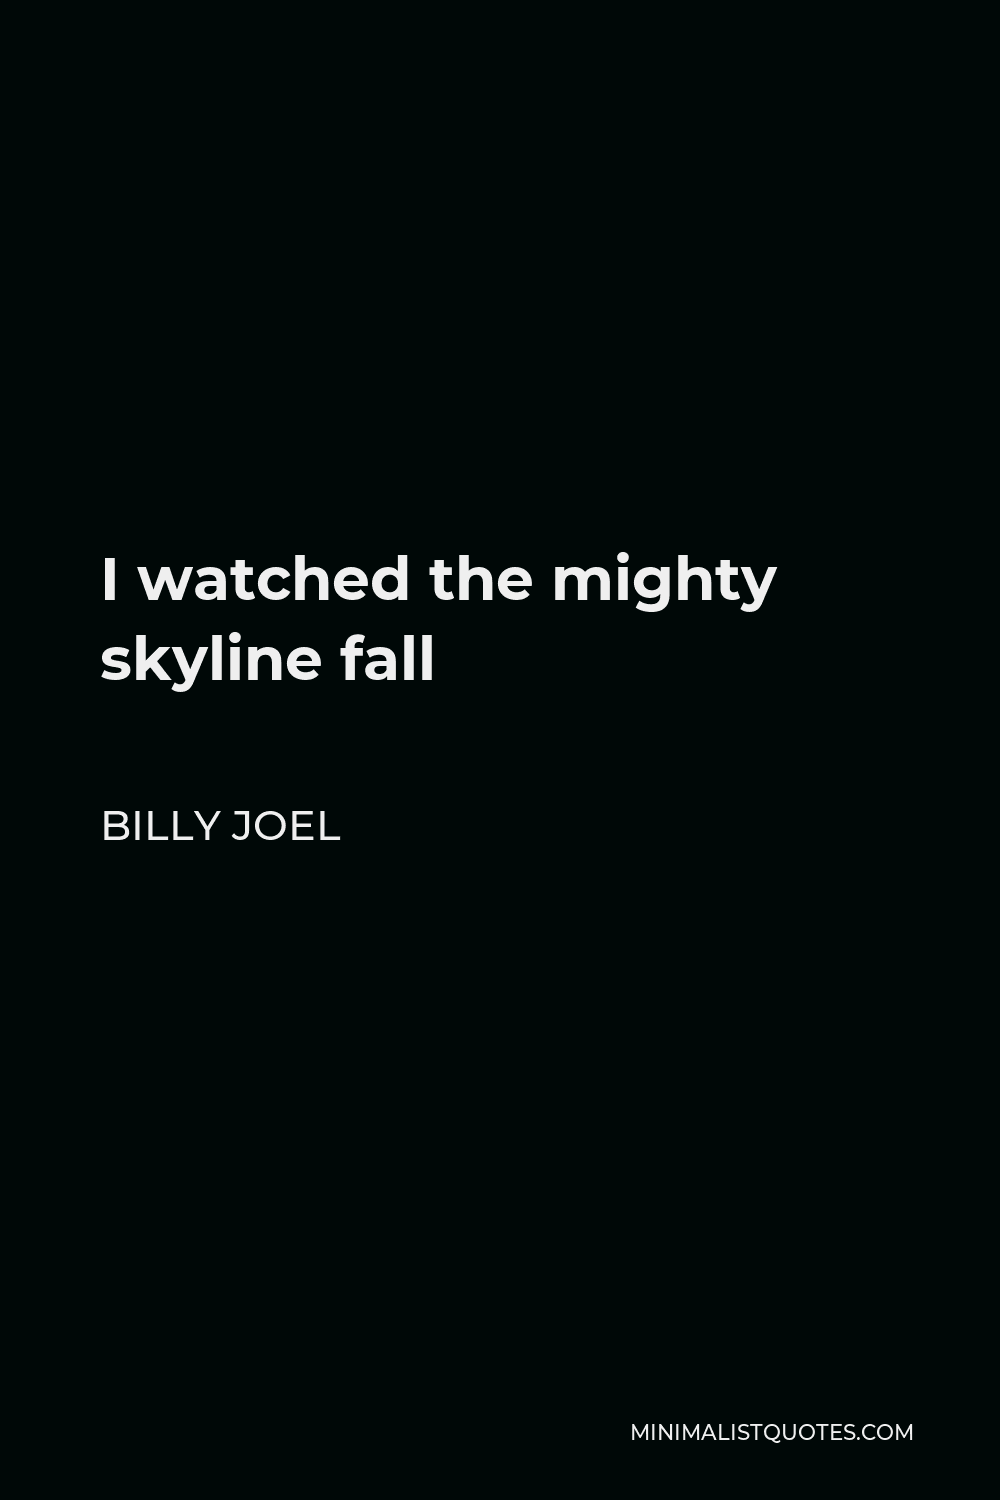 Billy Joel Quote - I watched the mighty skyline fall